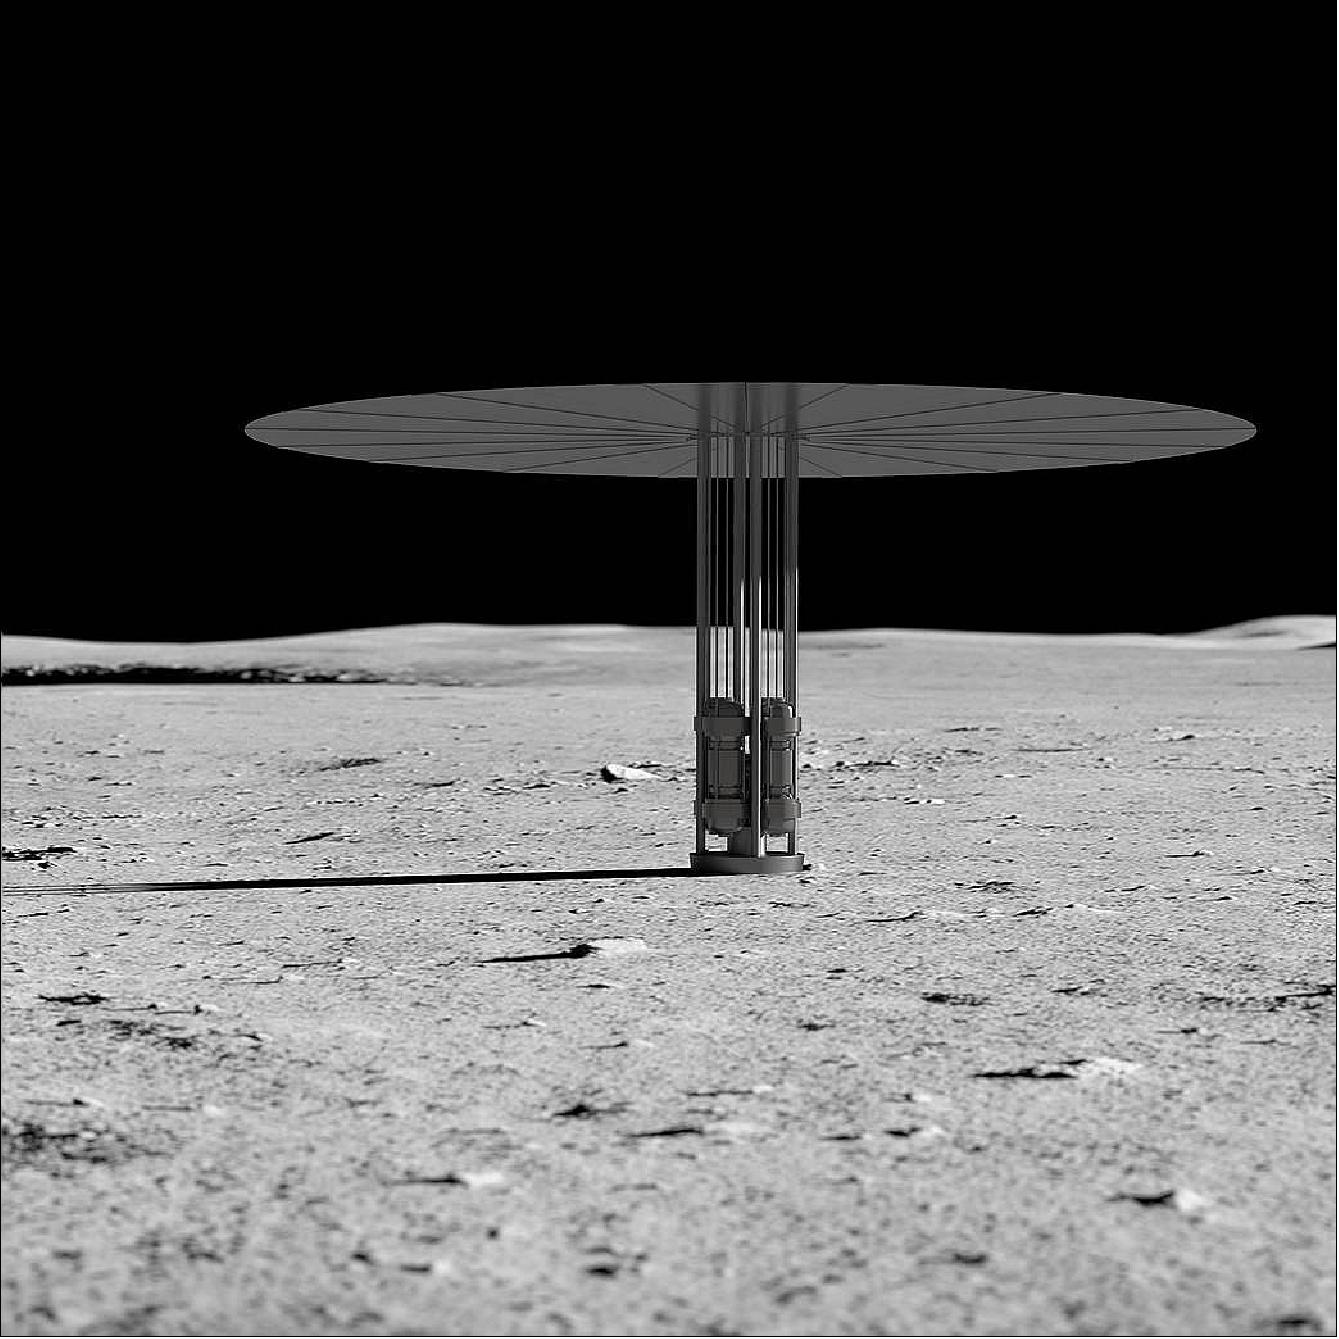 Figure 4: Artist's concept of a fission power system on the lunar surface (image credit: NASA)